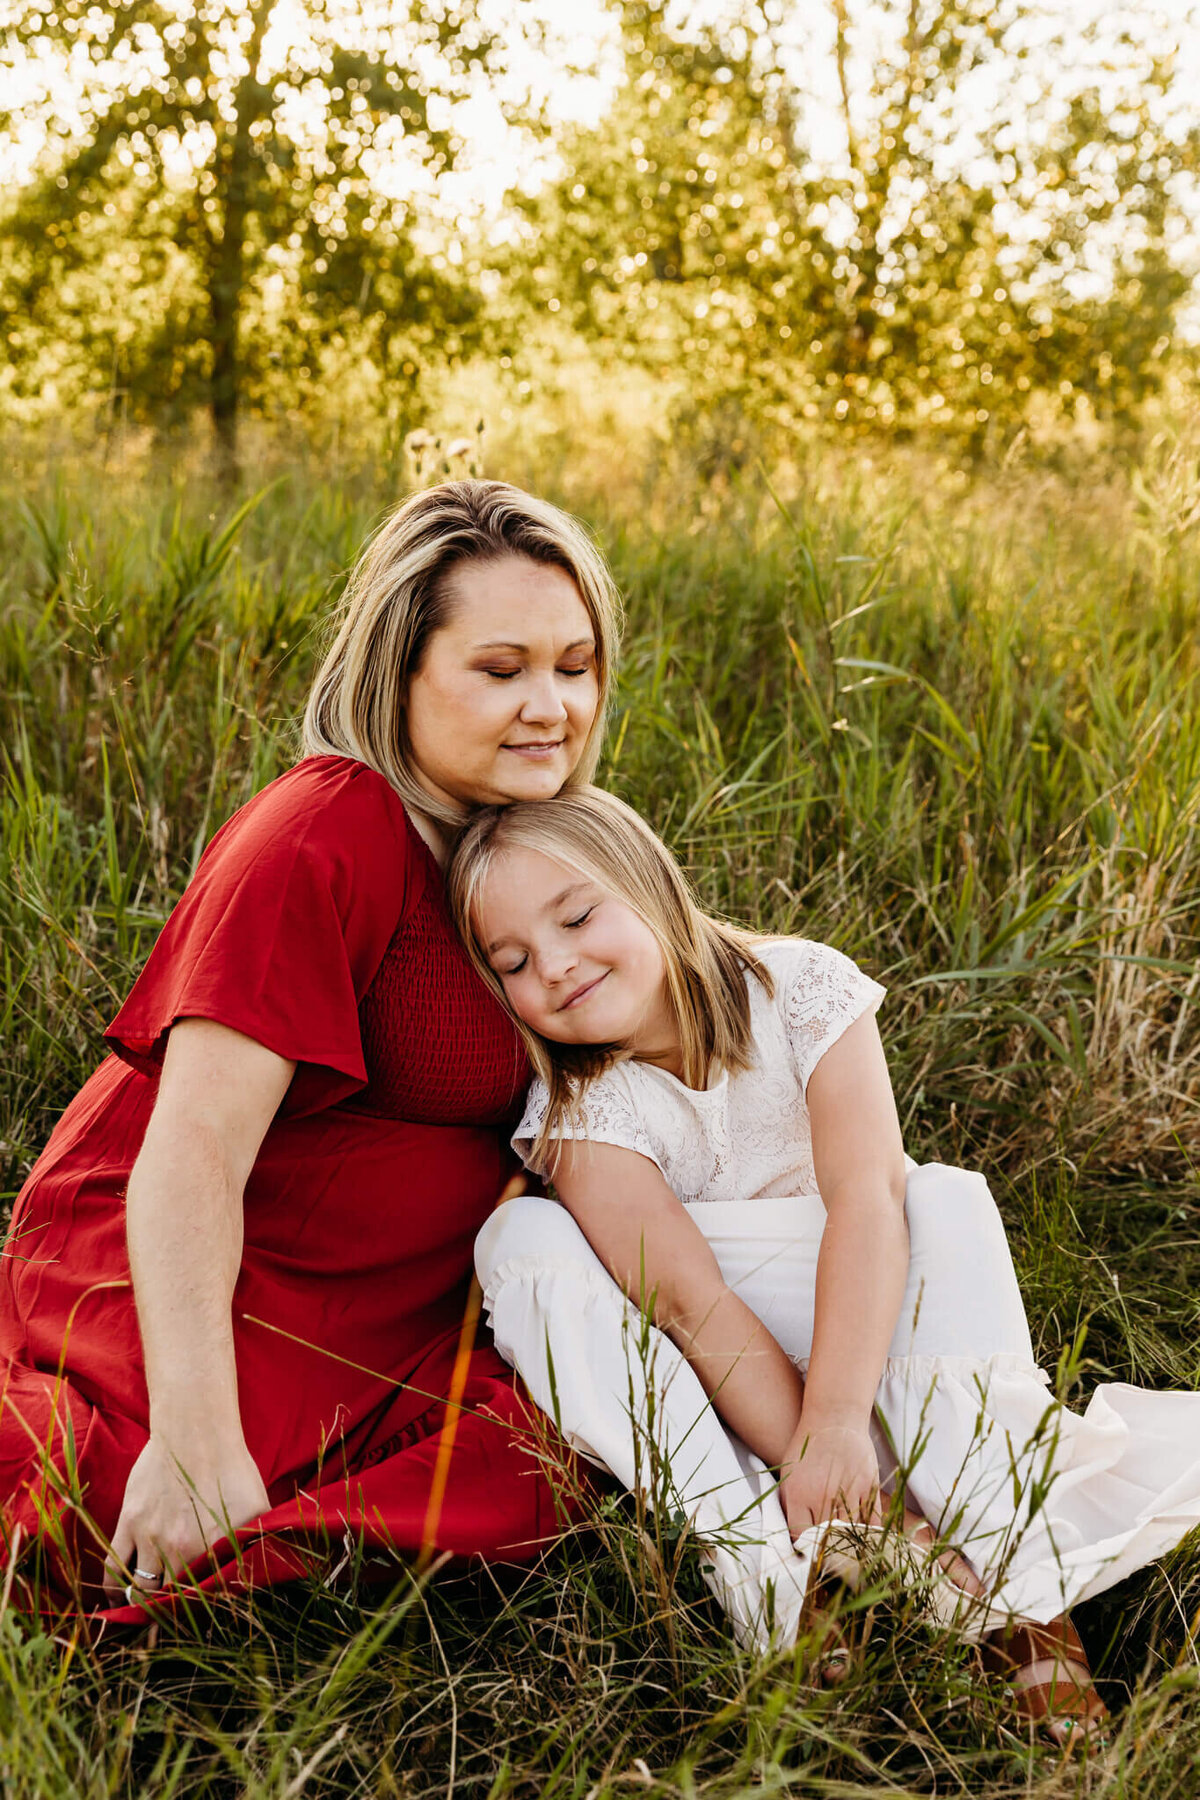 Mom in red dress snuggling & embracing daughter in a white dress in Milwaukee